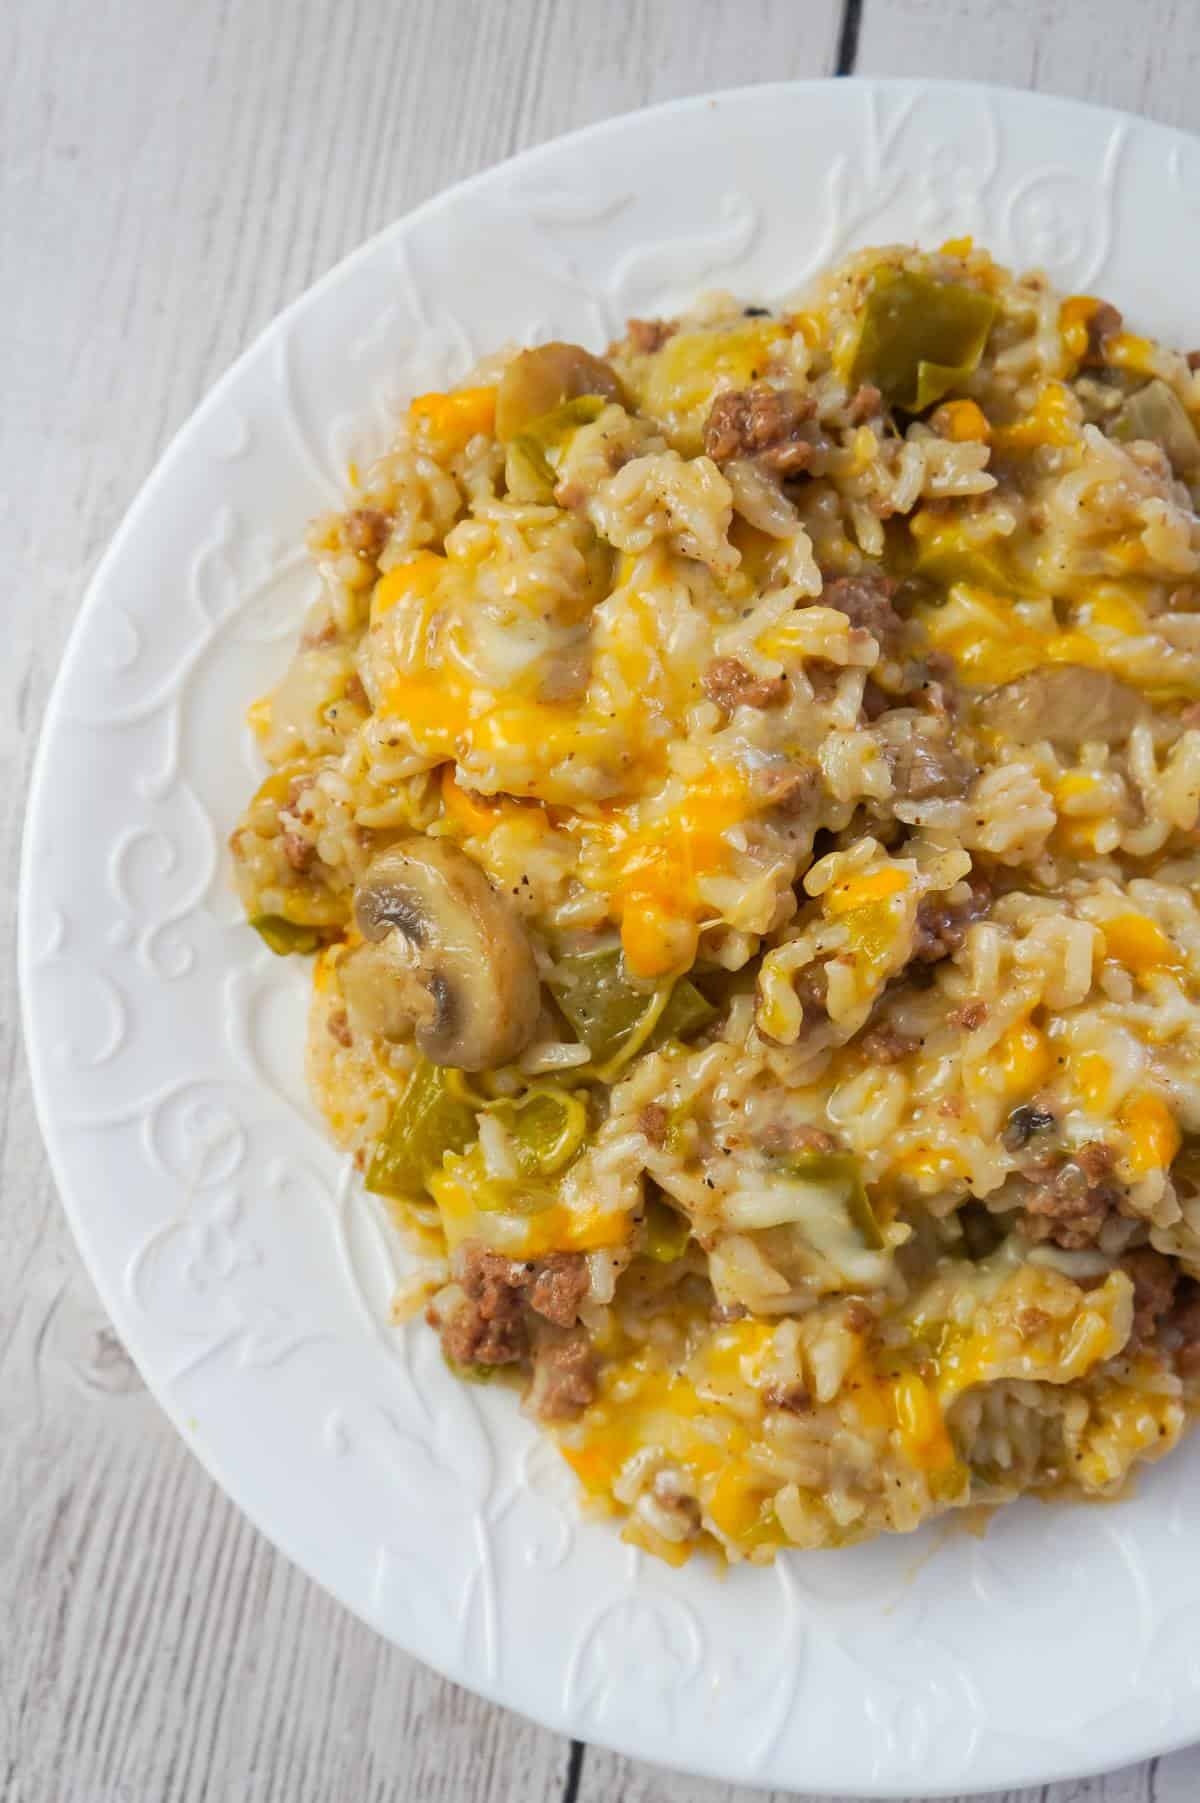 Instant Pot Philly Cheese Steak Ground Beef and Rice is an easy ground beef dinner recipe loaded with long grain white rice, green peppers, onions, mushrooms and shredded cheese.